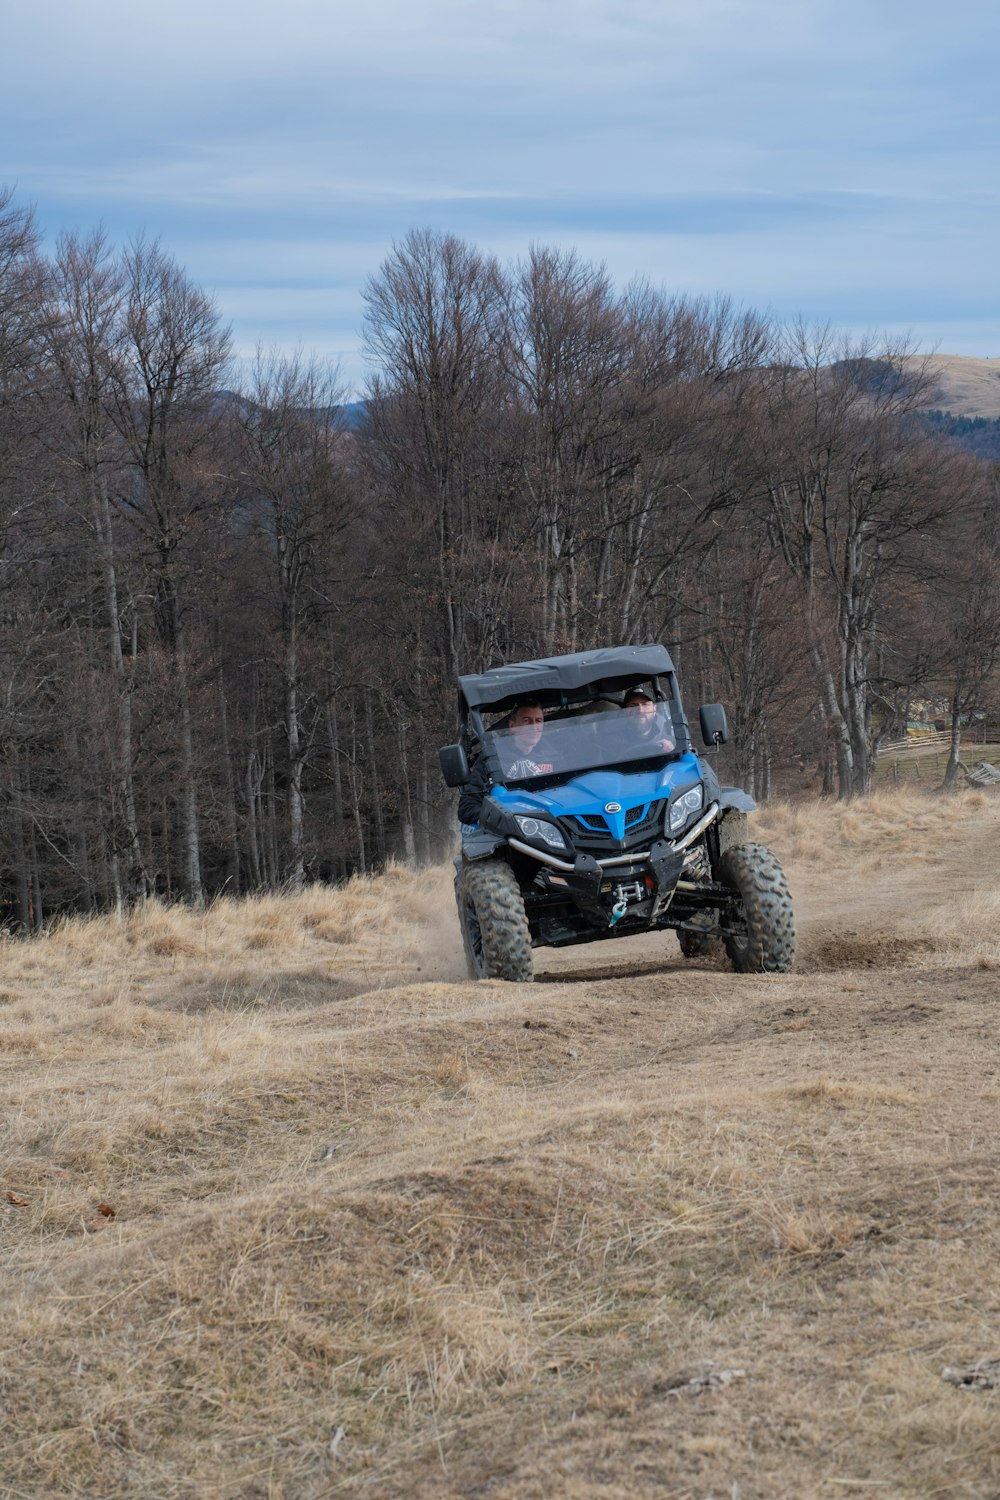 a person riding a buggy on a dirt road